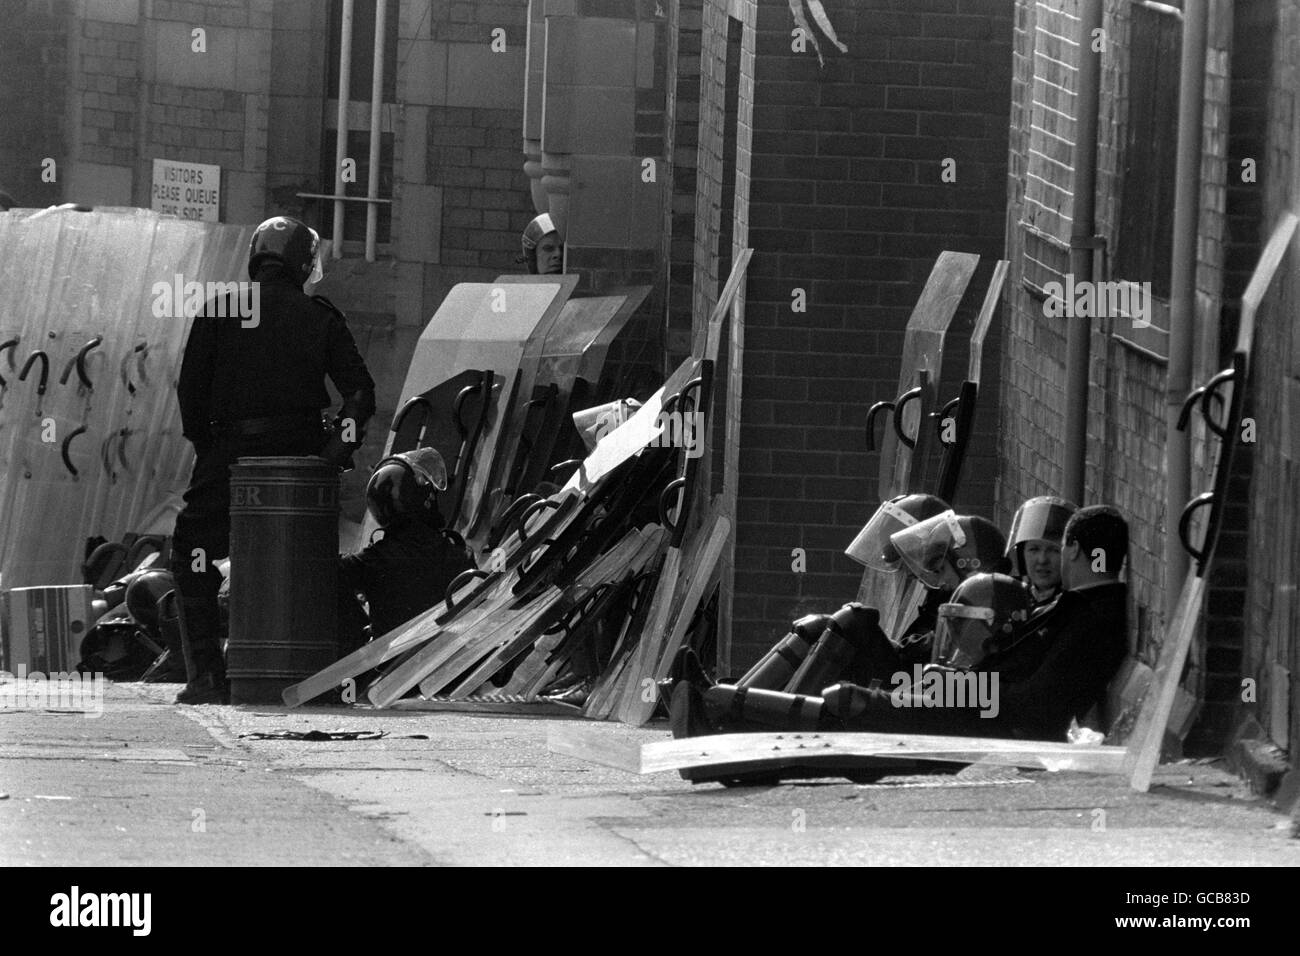 Crime - Strangeways Prison Riot - Manchester. Exhausted riot police and piles of riot shields at Stranegways Prison, Manchester. Stock Photo